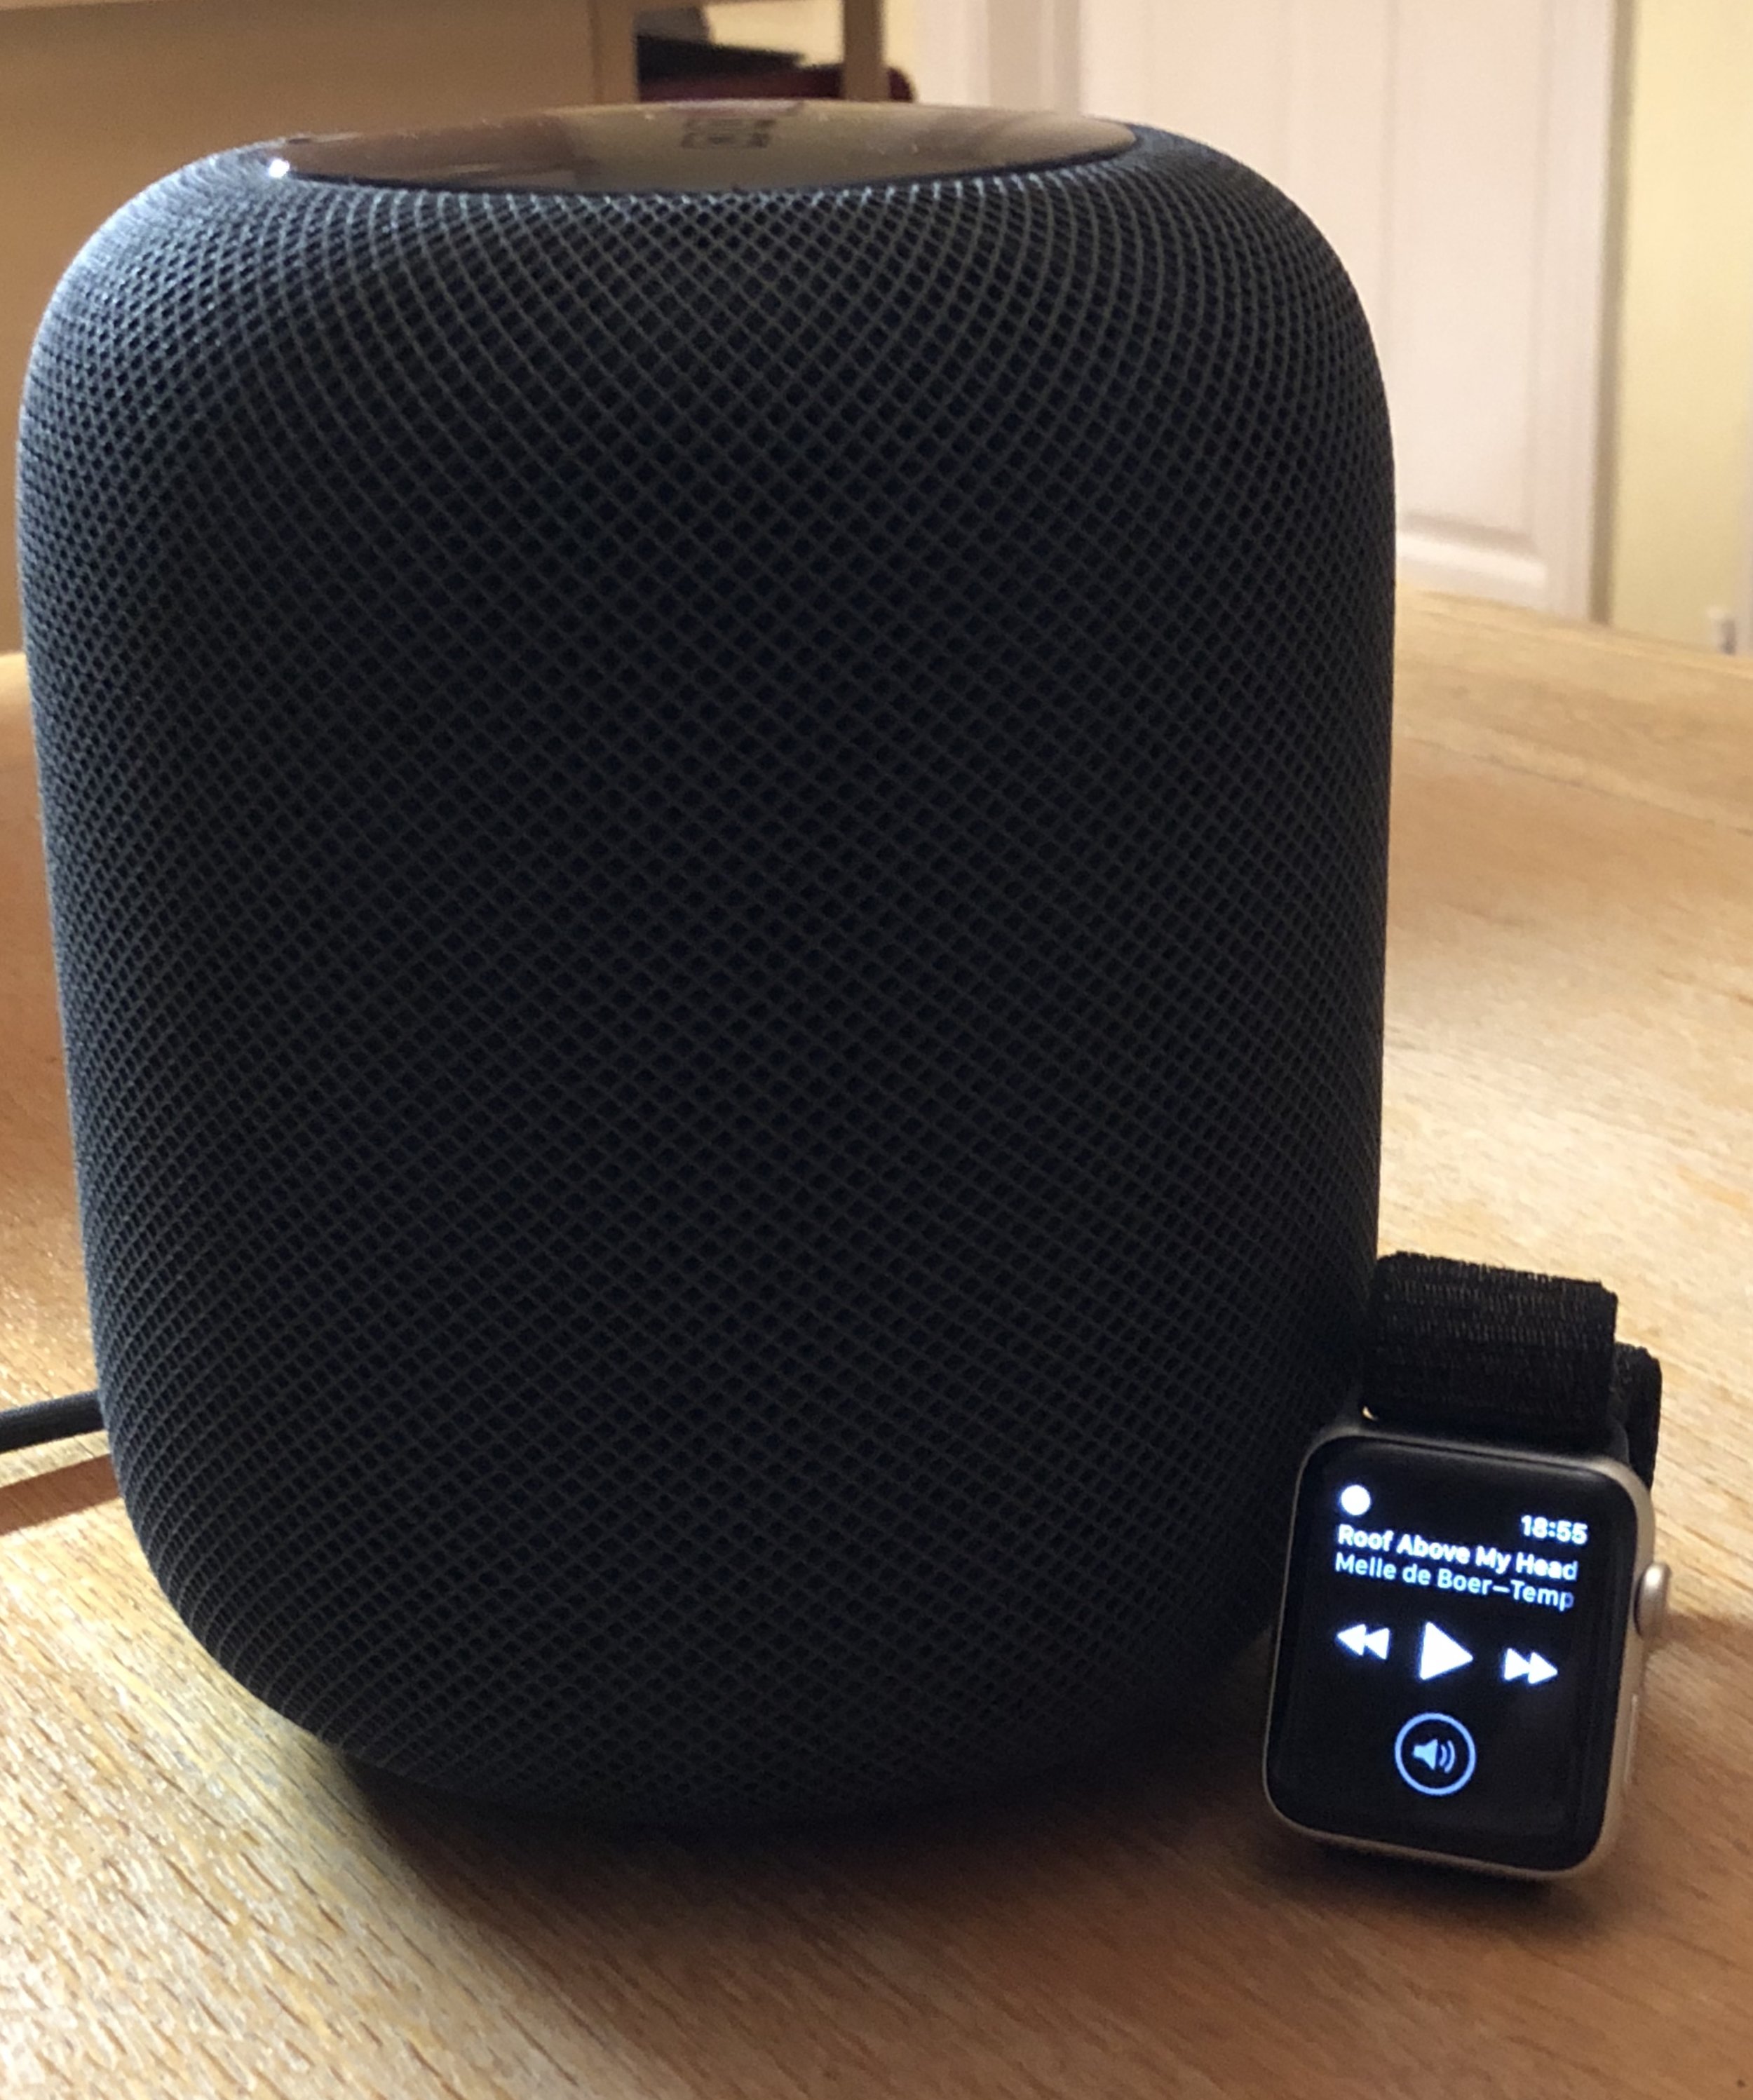 How to Control HomePod with Apple Watch 11